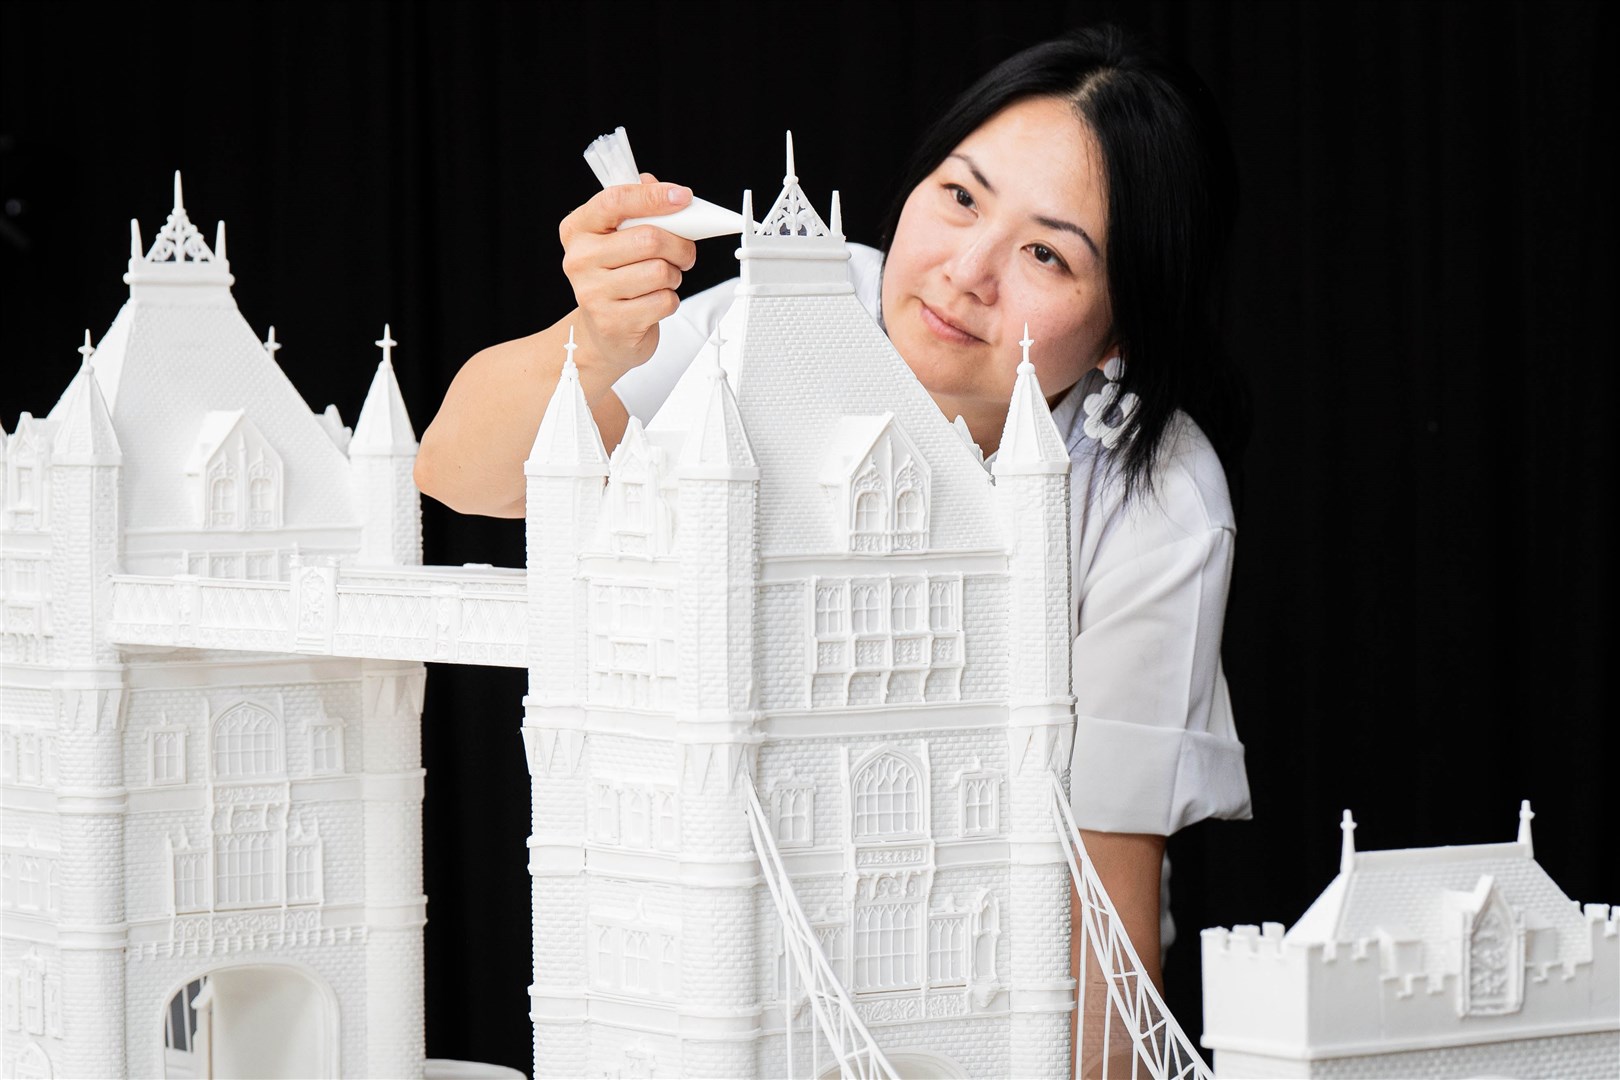 Wibowo took 150 hours to create her giant sugar sculpture (Aaron Chown/PA)